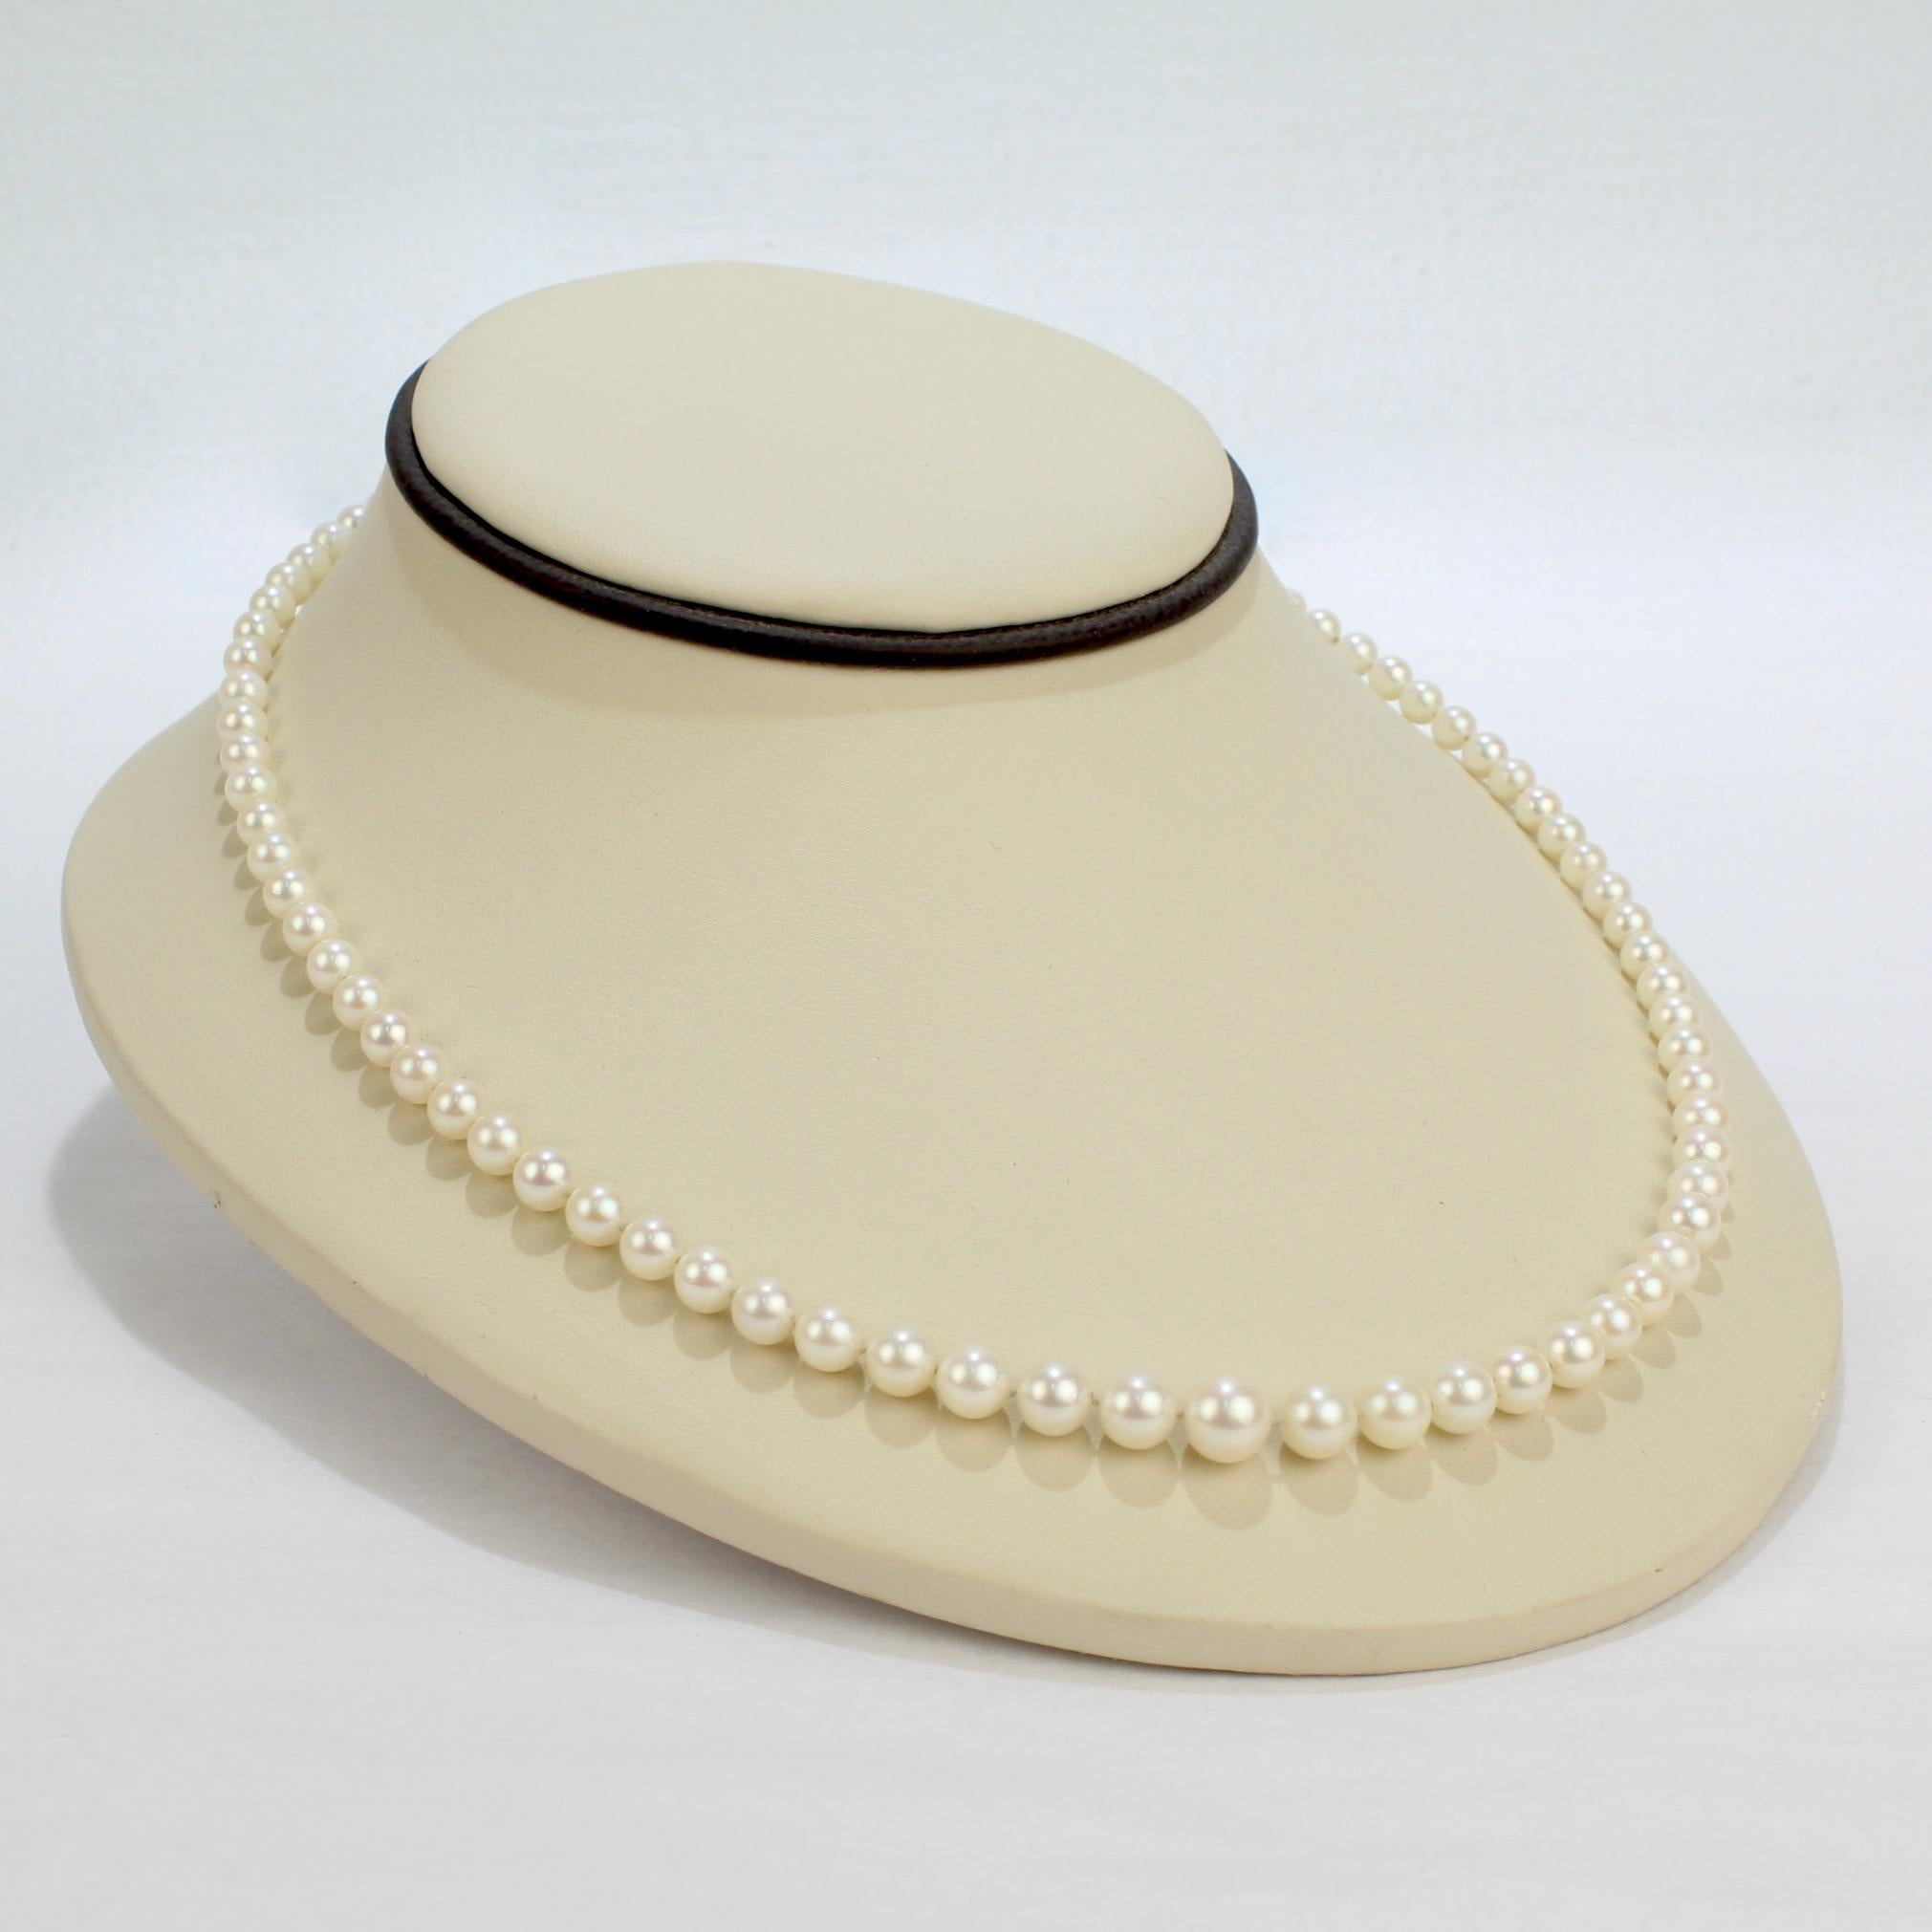 A very fine vintage Mikimoto Akoya cultured pearl strand necklace with a sterling silver clasp.

With graduated round white pearls on hand knotted silk.

Simply a fine necklace from Mikimoto!

Date:
20th Century

Overall Condition:
It is in overall